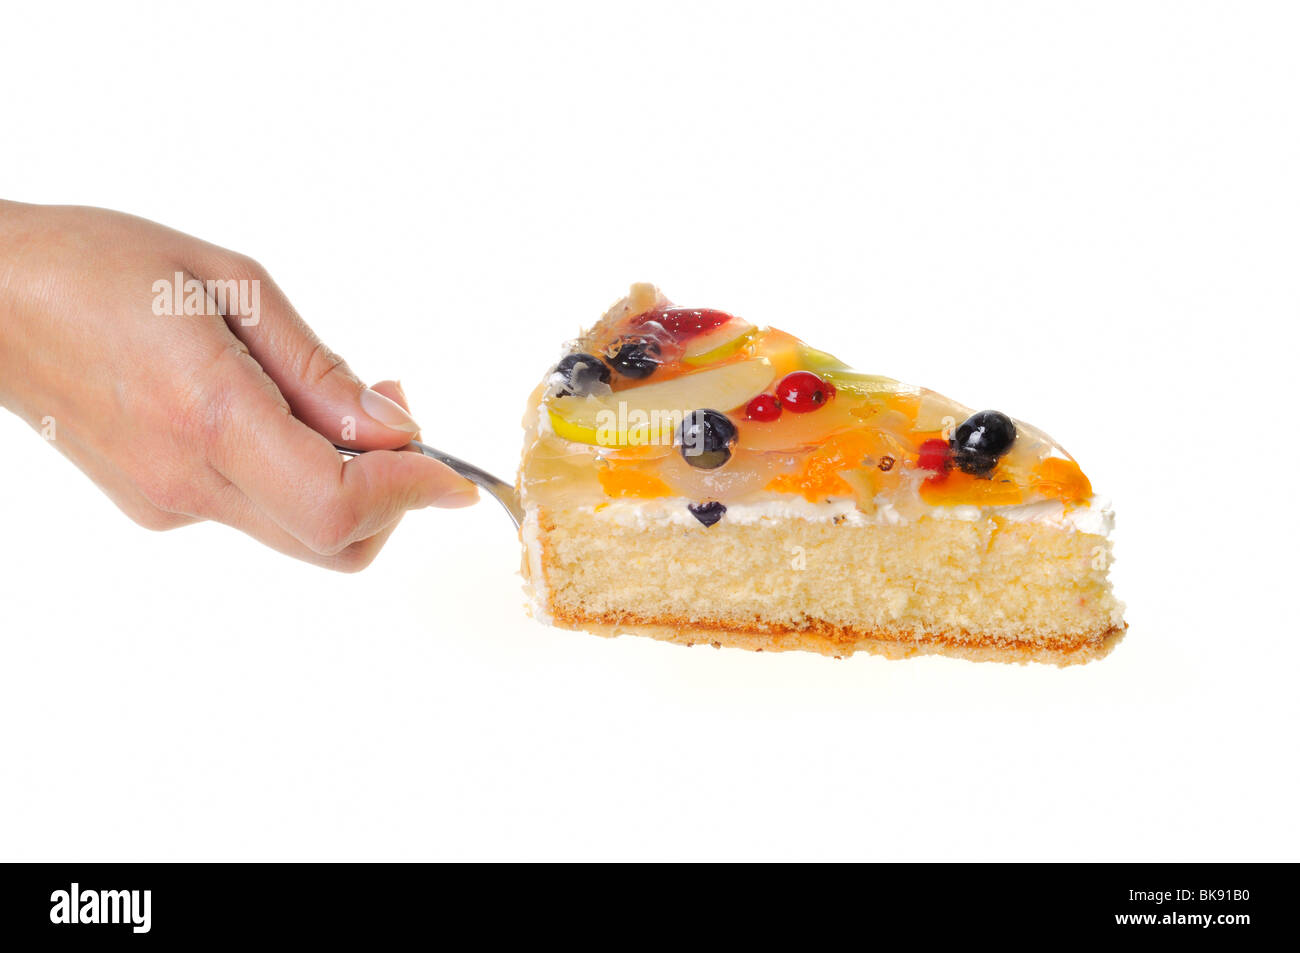 Woman's hand serving a piece of fruit cake on a cake server Stock Photo